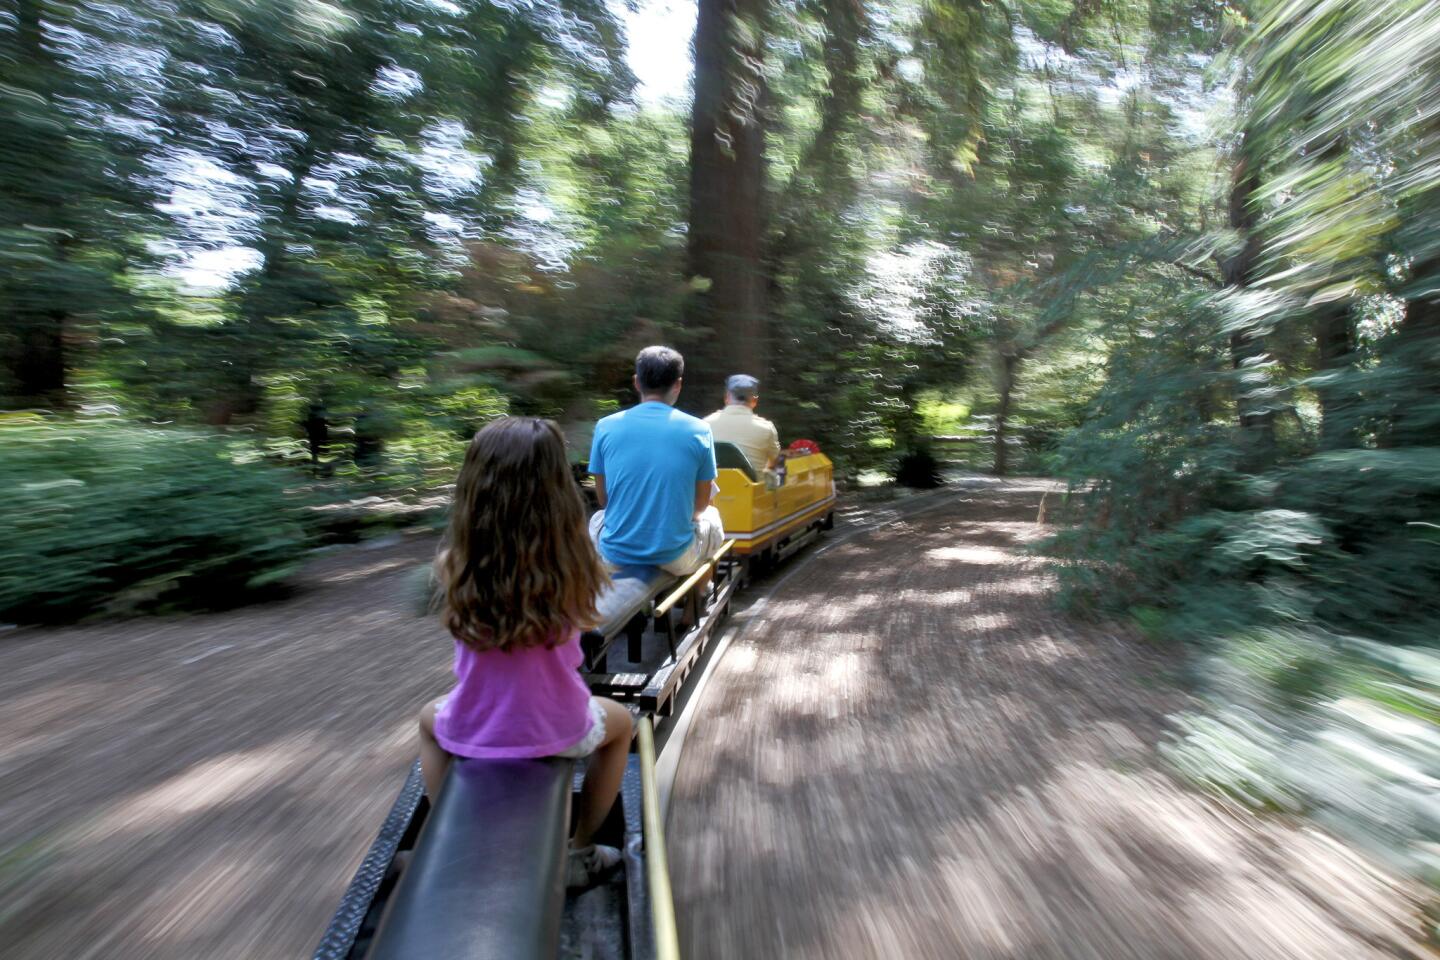 Elizabeth Pittman, 4 and visiting from Ft. Worth Tx., rides the Enchanted Gardens Railroad train on the Fourth of July weekend, at Descanso Gardens in La Cañada Flintridge on Saturday, July 2, 2016. The train rides are not included with admission and require the purchase of an additional ticket.